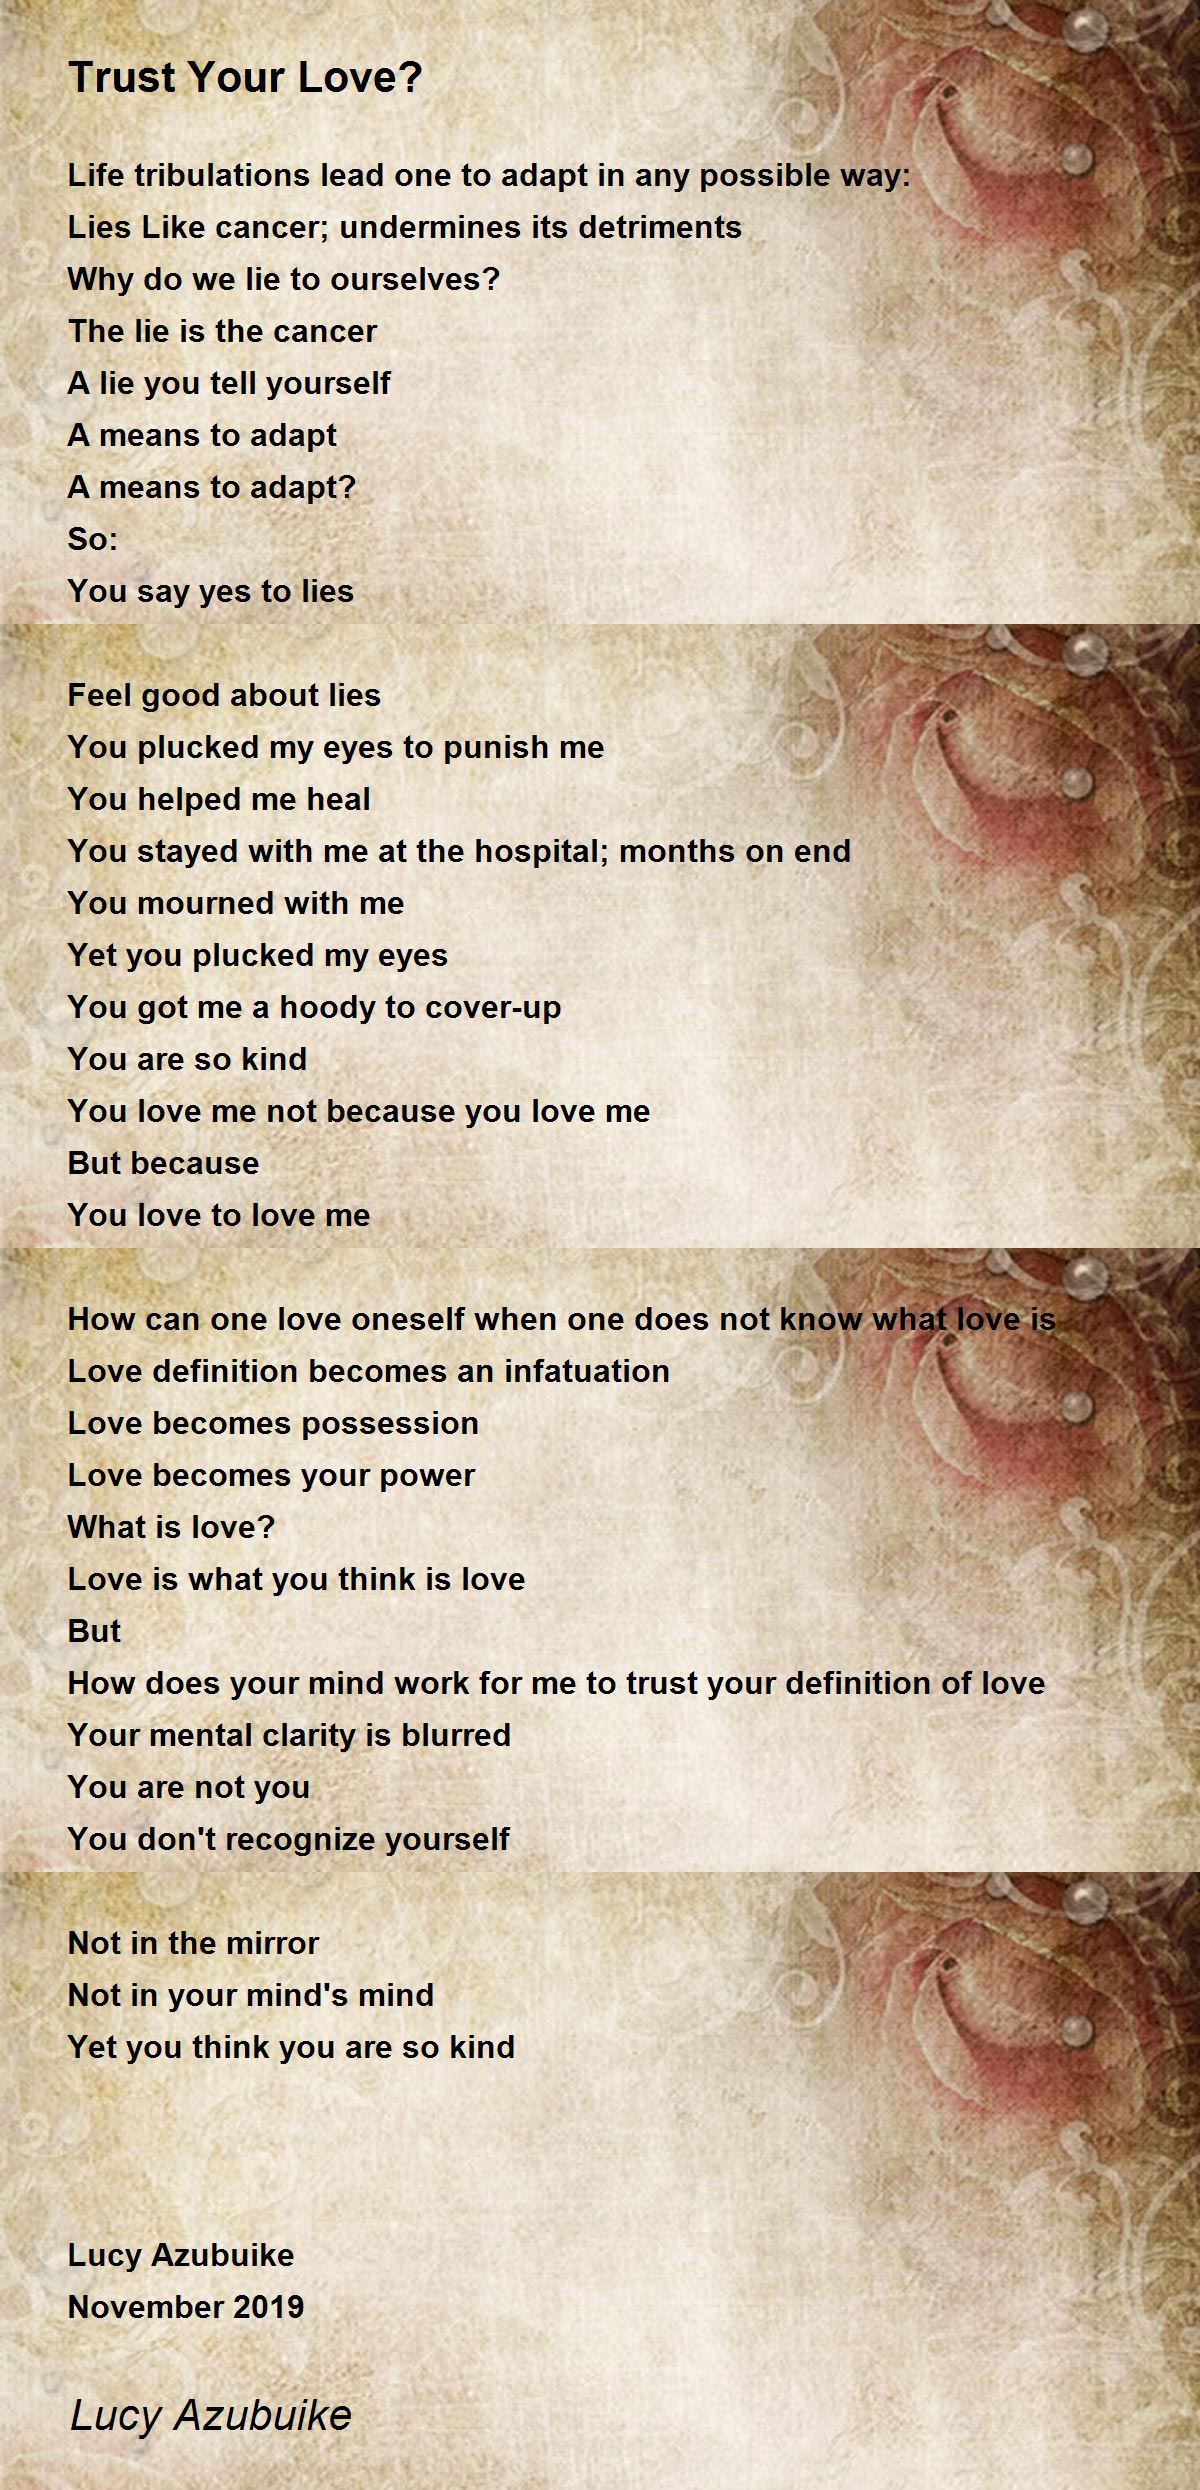 Trust Your Love? - Trust Your Love? Poem by Lucy Azubuike